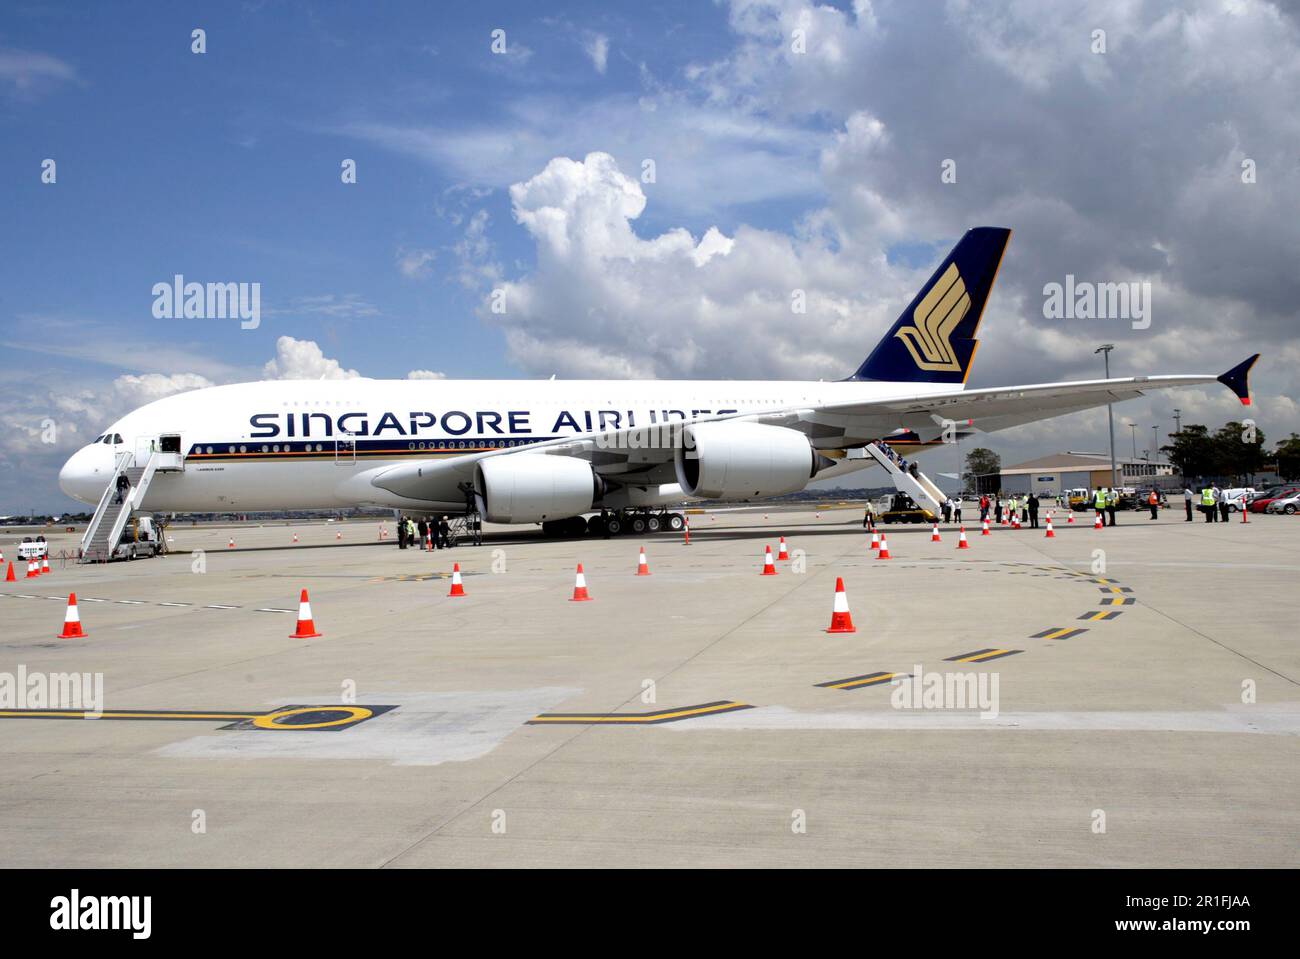 The Singapore Airlines A380 aircraft at Sydney (Kingsford Smith) Airport. Sydney, Australia. 26.10.07. Stock Photo